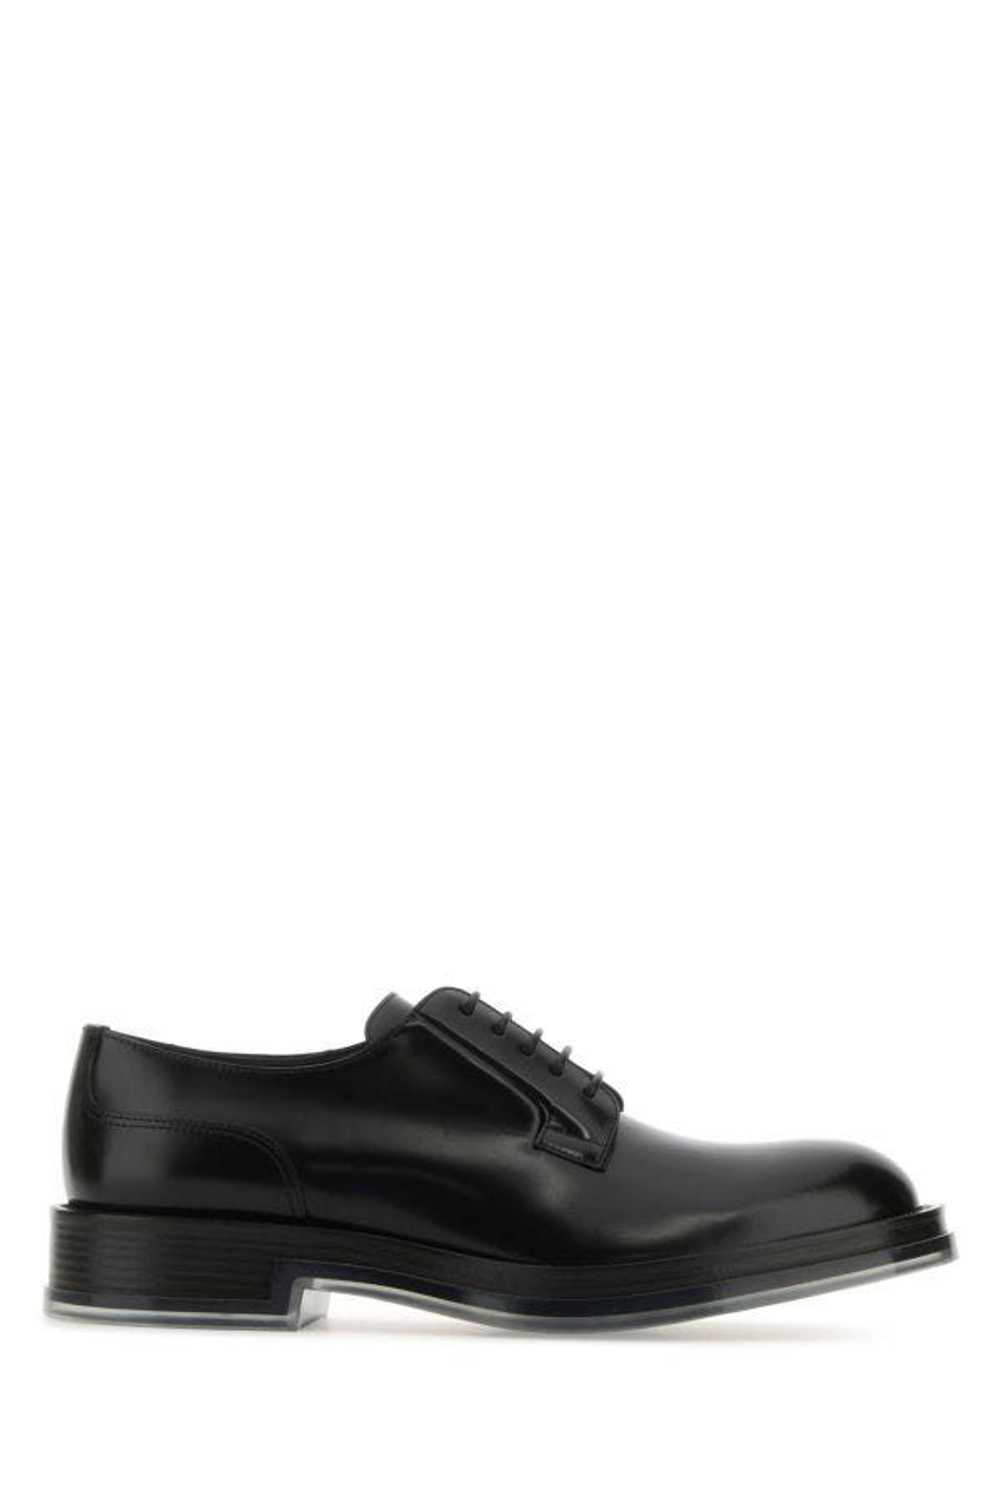 Alexander McQueen Black Leather Float Lace-Up Sho… - image 3